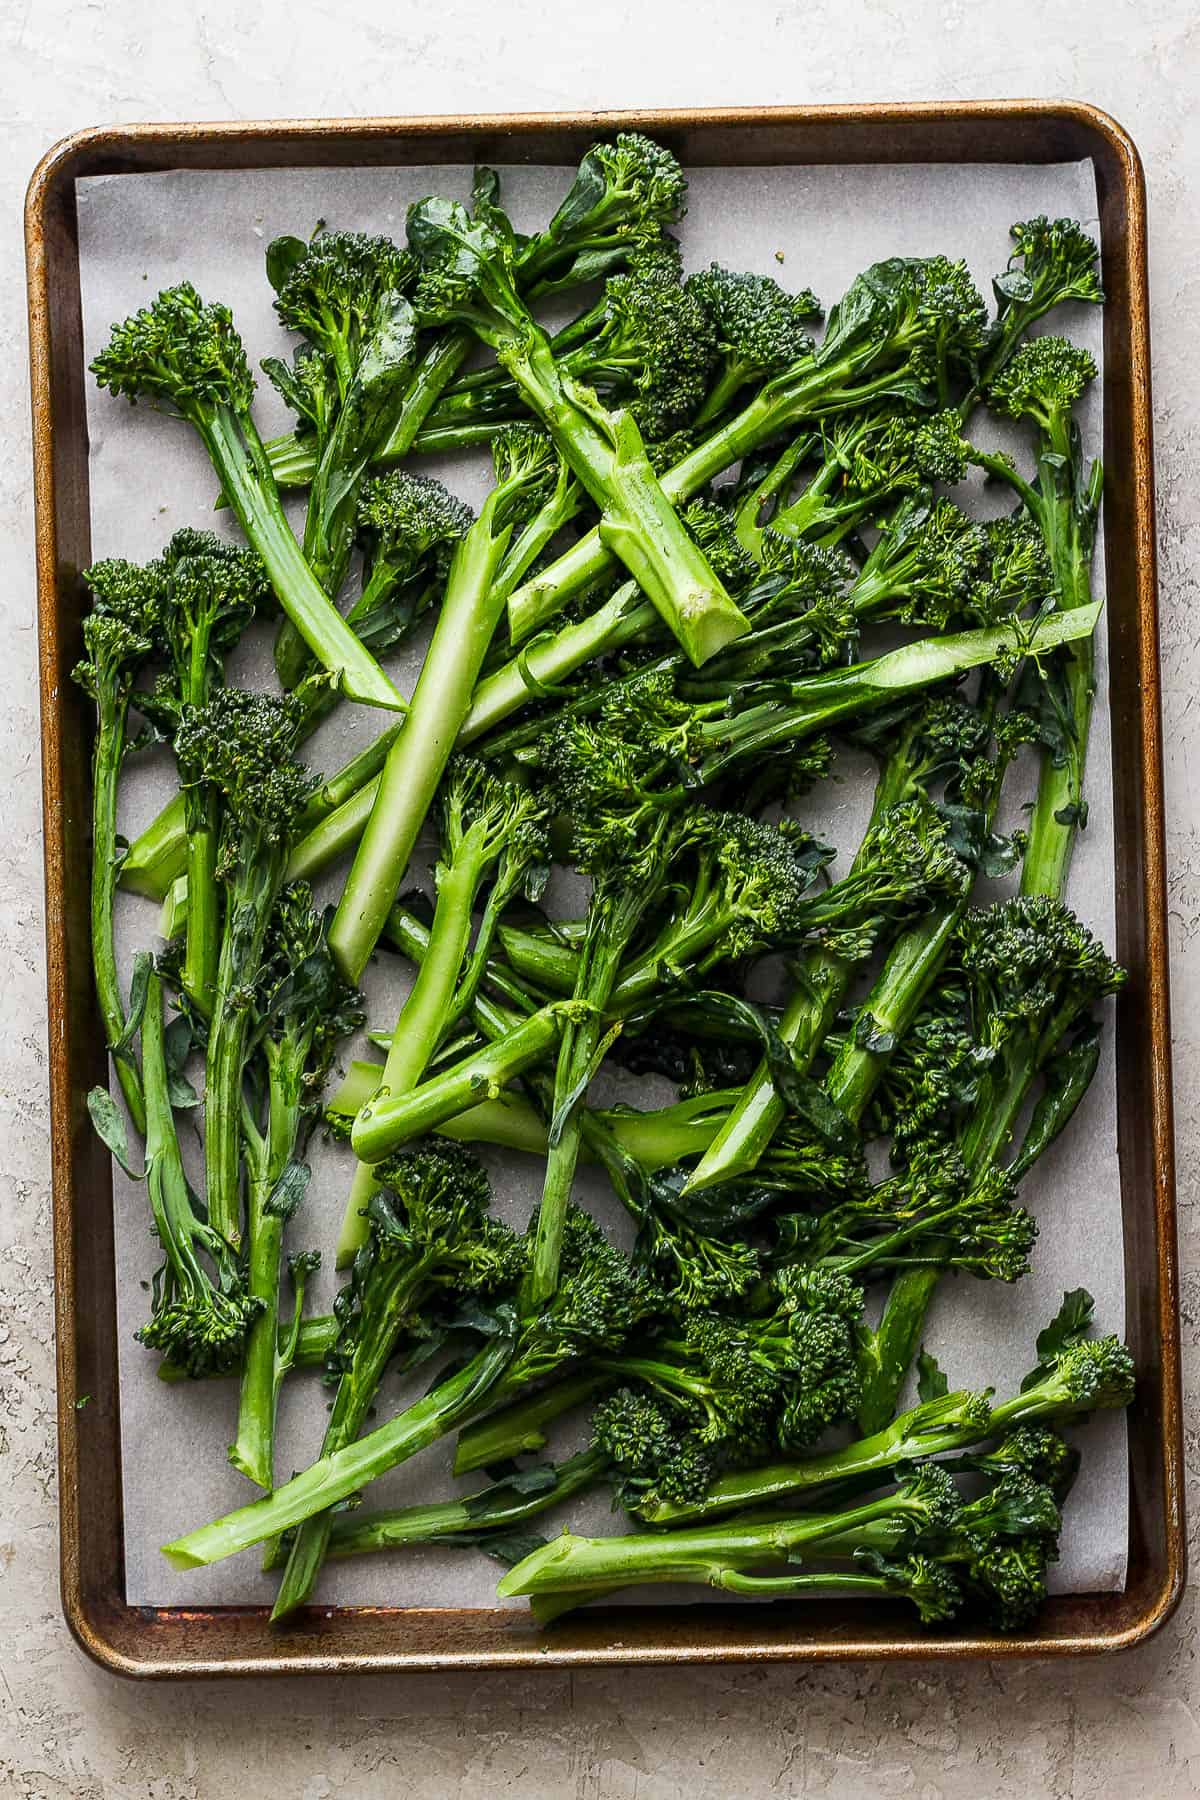 Oiled and seasoned broccolini on a baking sheet before baking.